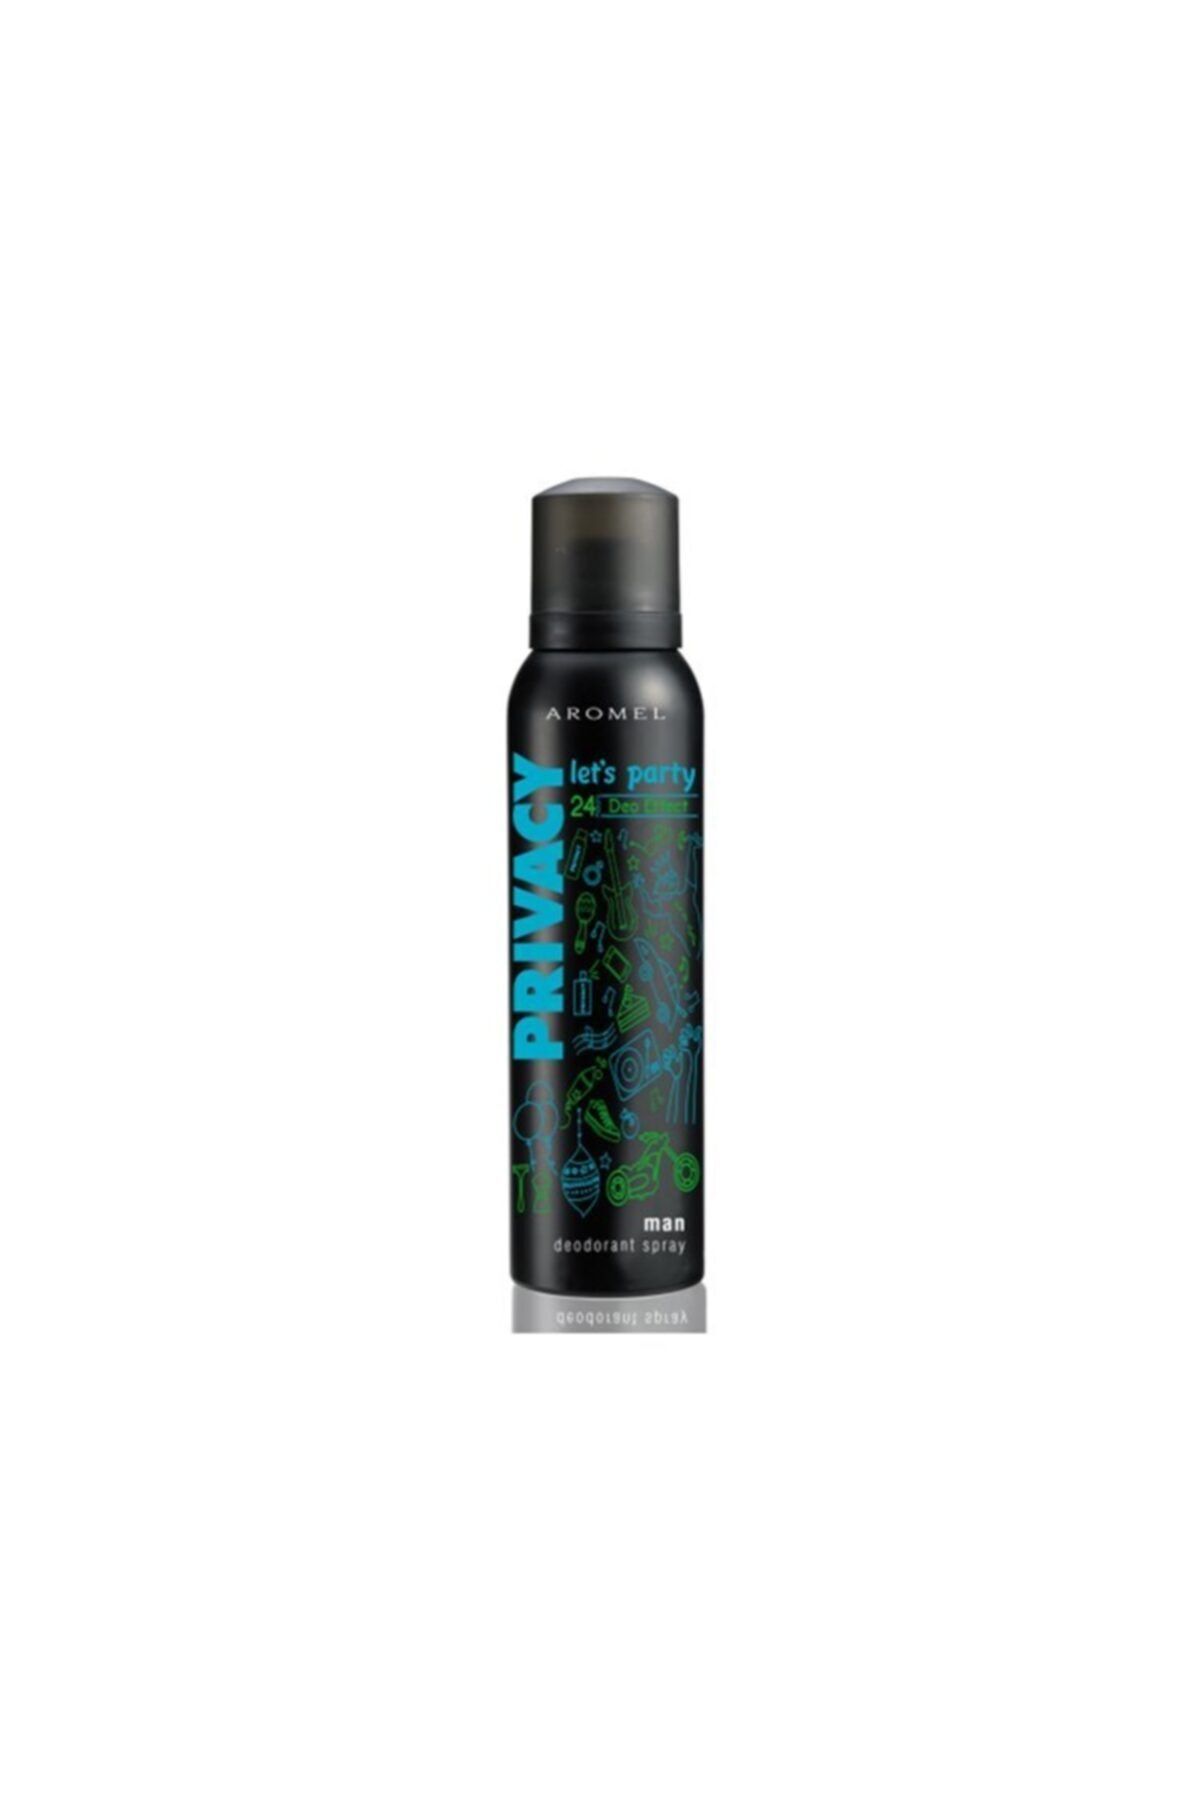 Privacy Deo Man 150ml Let's Party